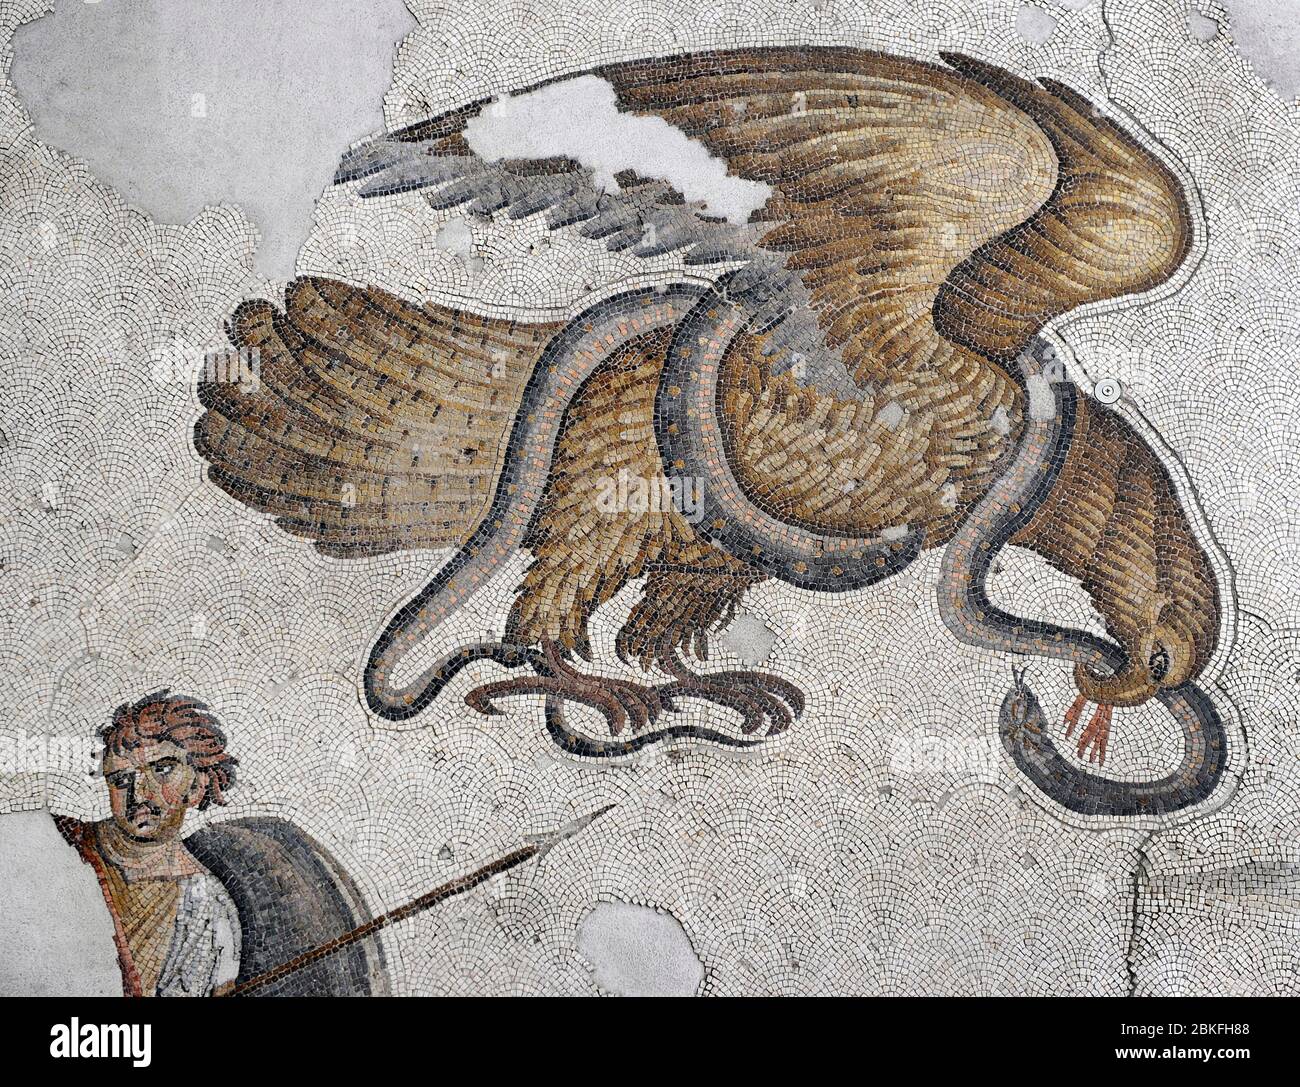 Great Palace of Constantinople (East Roman period). Detail of one of the mosaics that decorated the pavements. Fight between eagle and snake. 4th-6th century. Great Palace Mosaics Museum. Istanbul, Turkey. Stock Photo